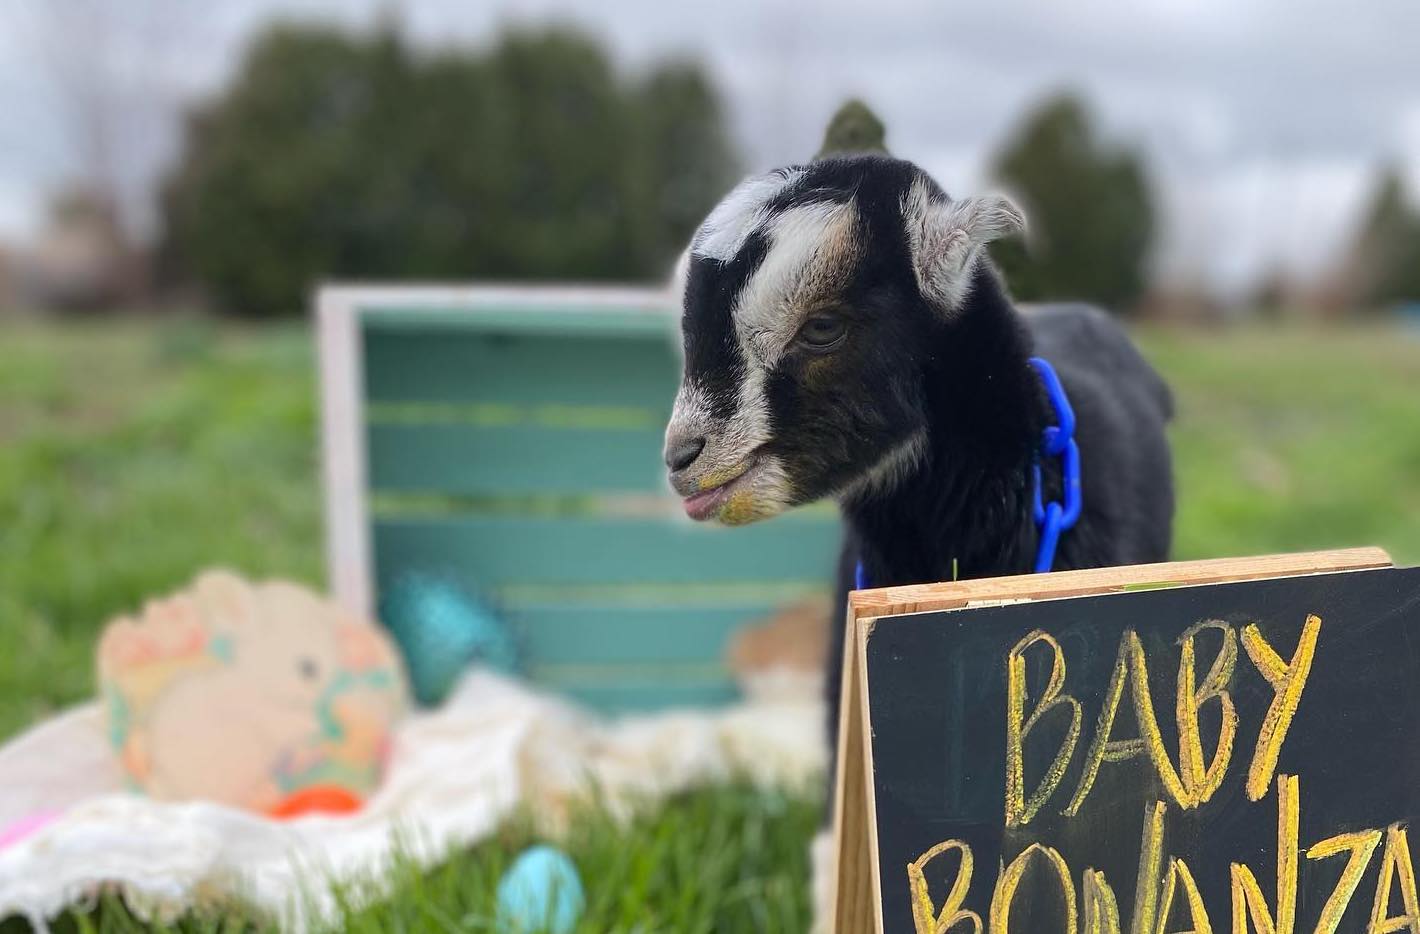 You can now visit the baby goats at Prairie Fruits Farm on the weekends